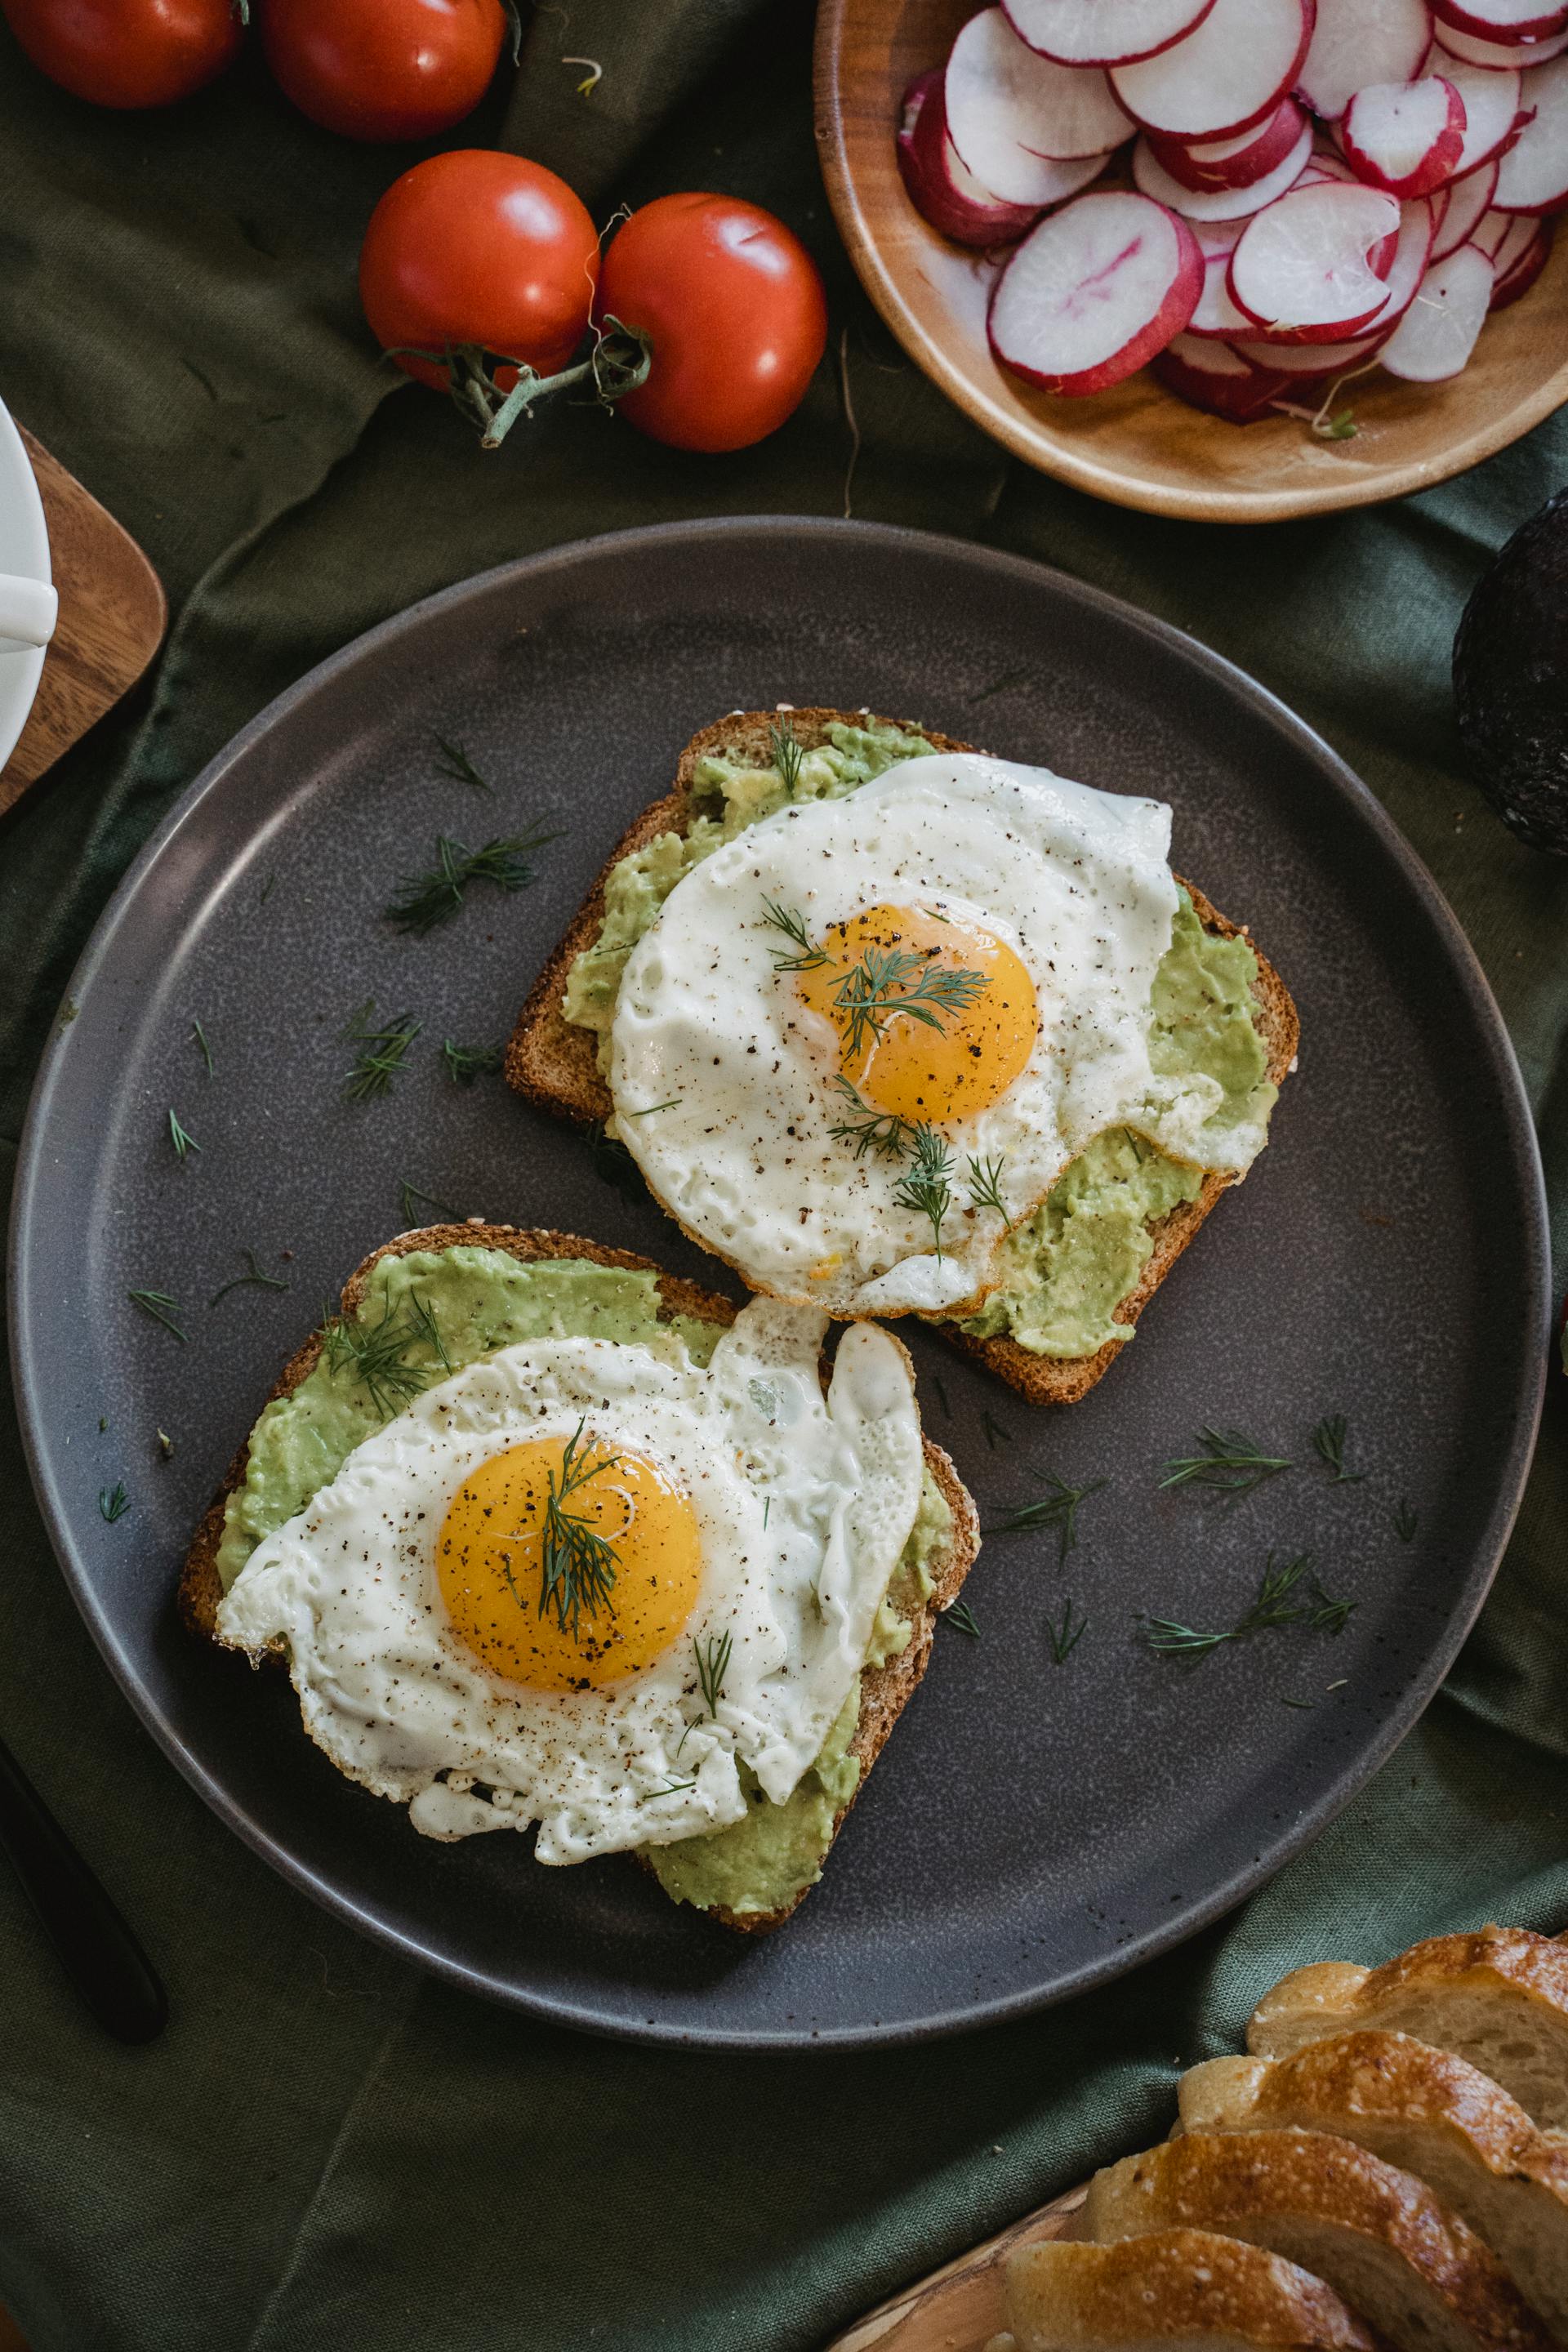 A plate of eggs on toast | Source: Pexels